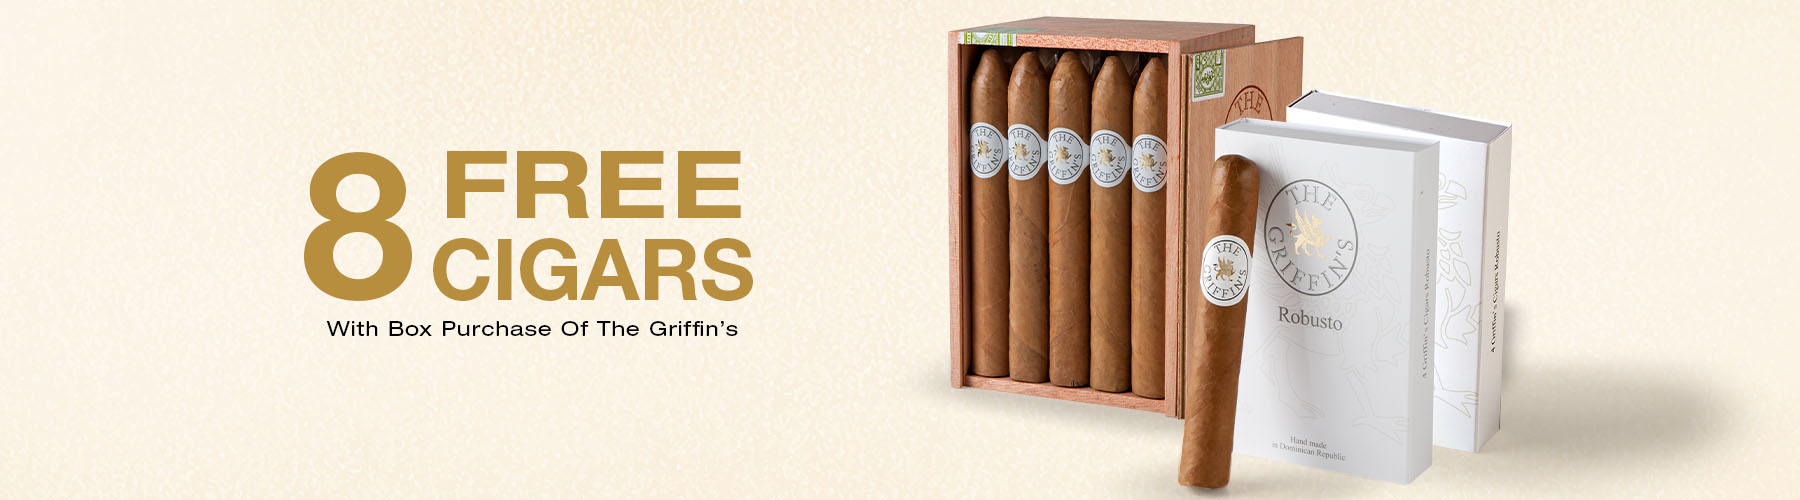 8 free cigars with Griffin's boxes!